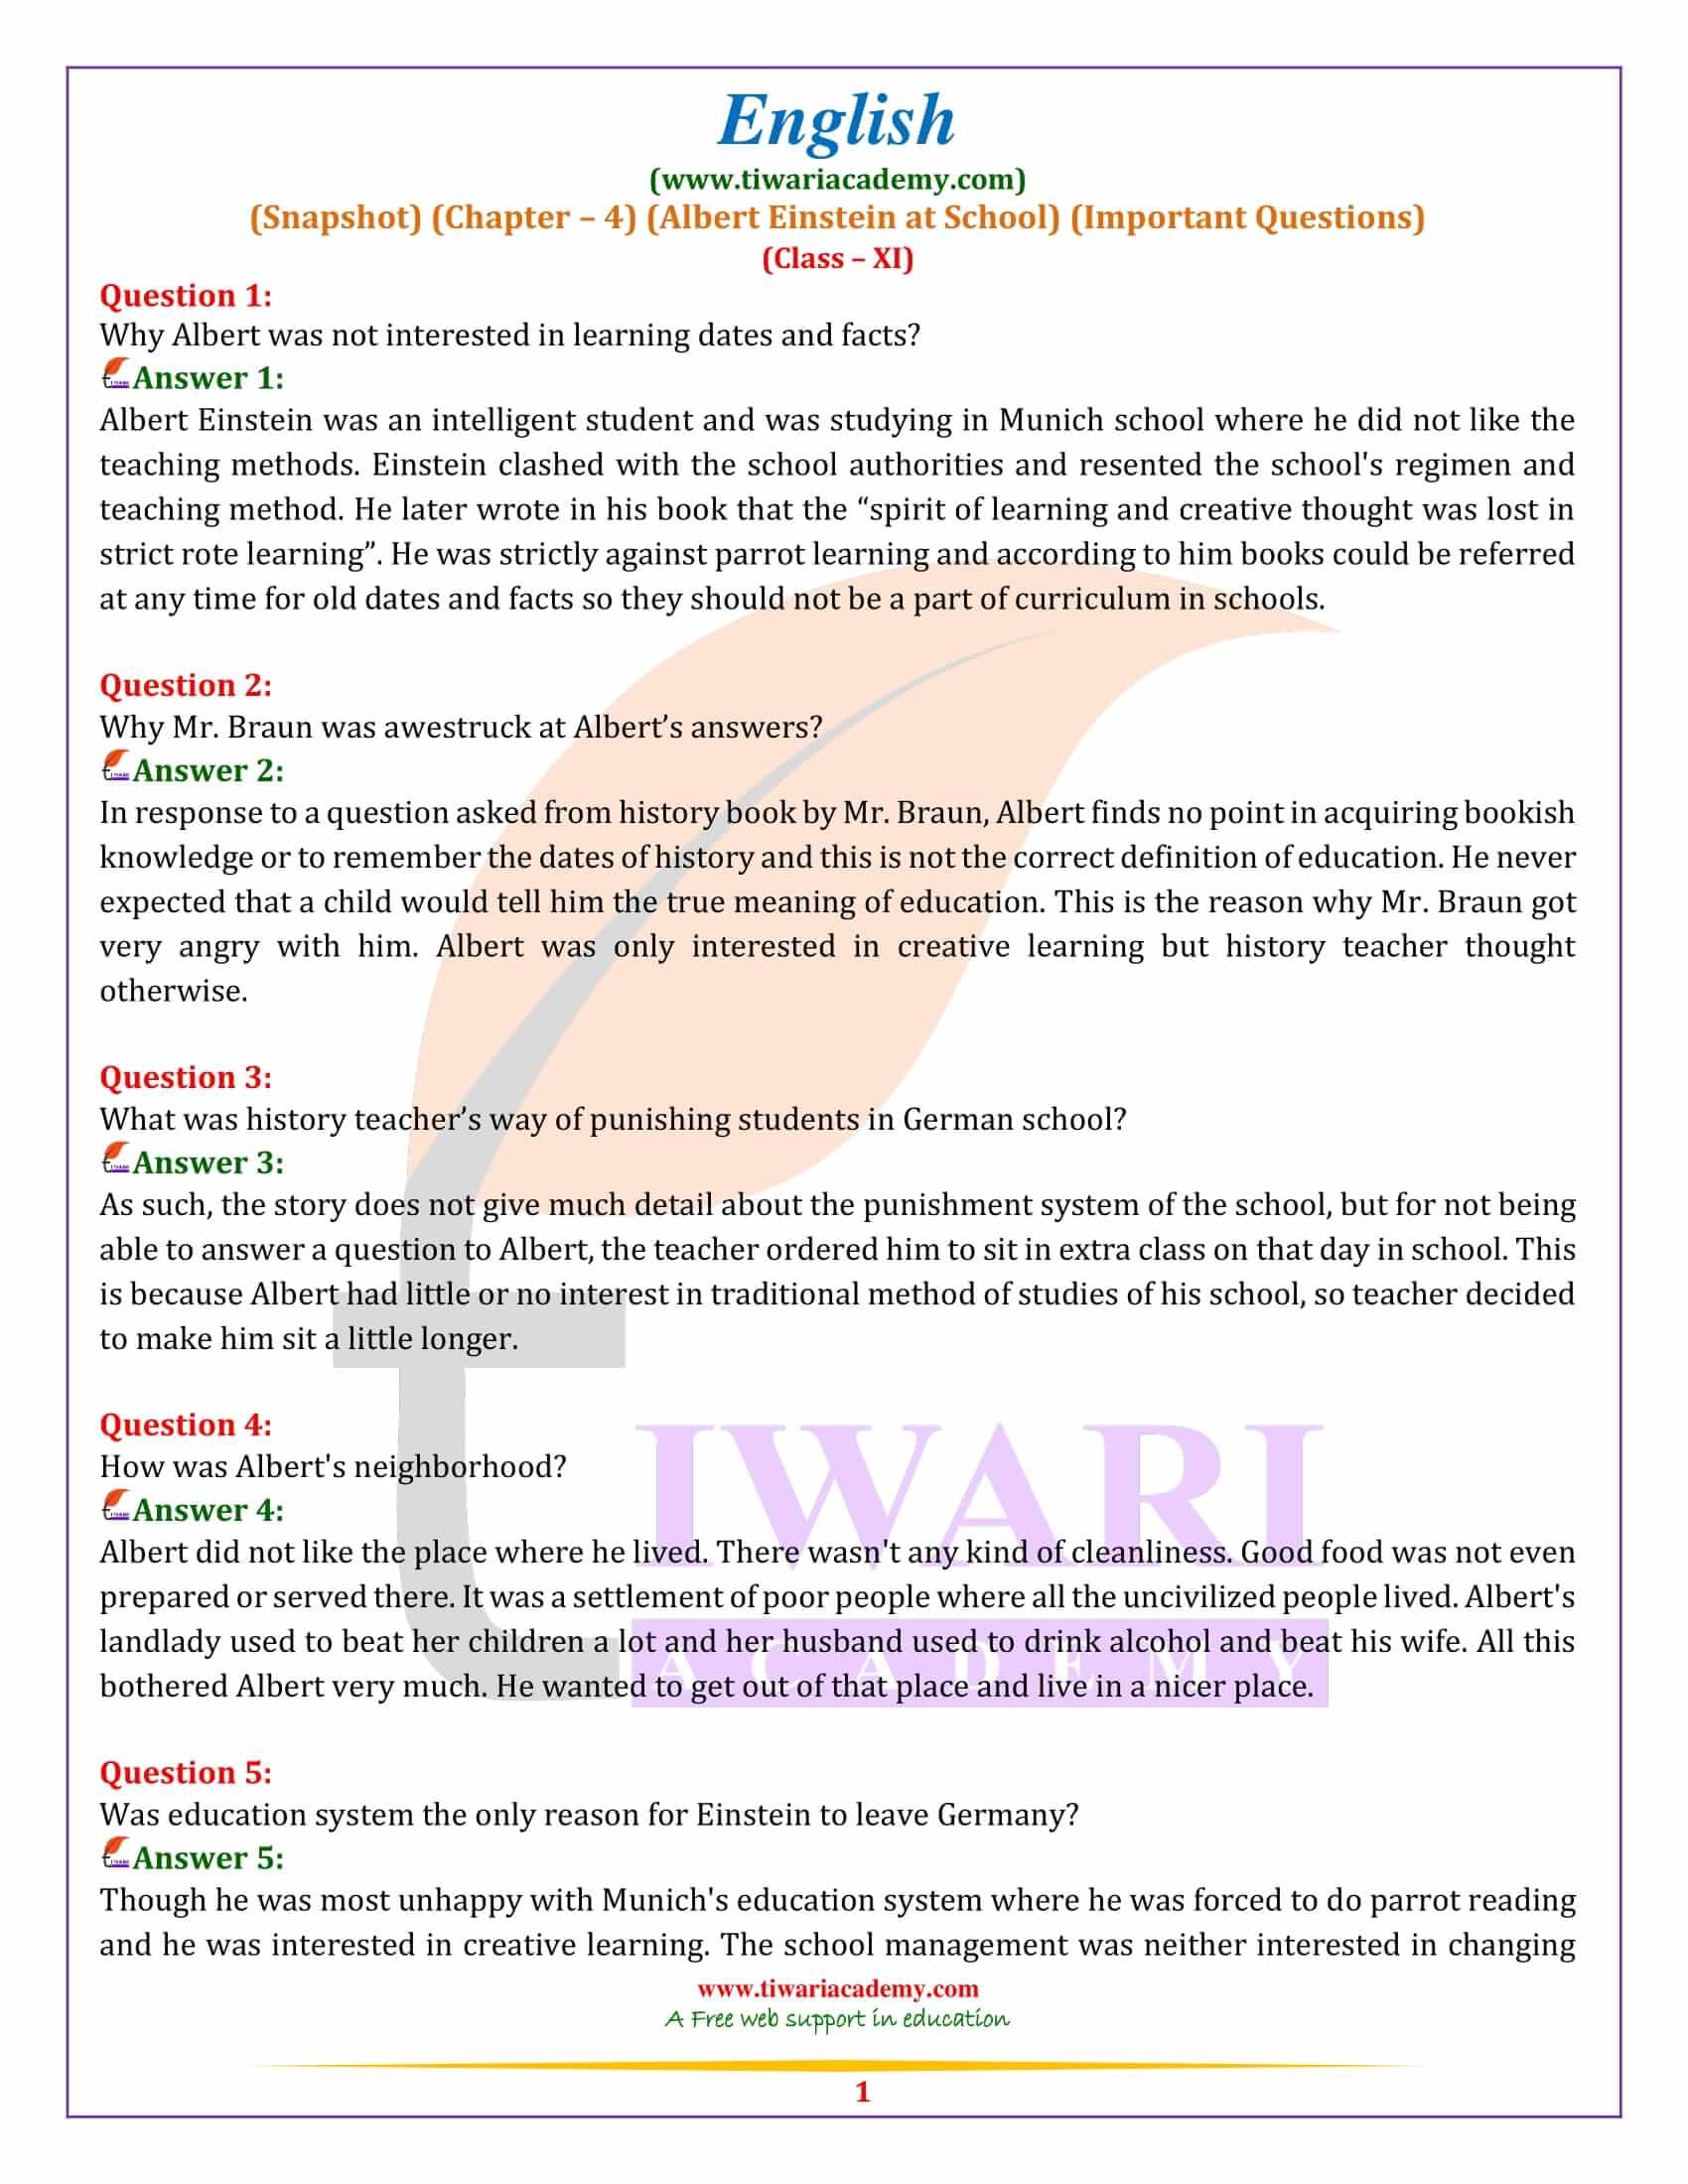 Class 11 English Snapshots Chapter 4 Extra Questions